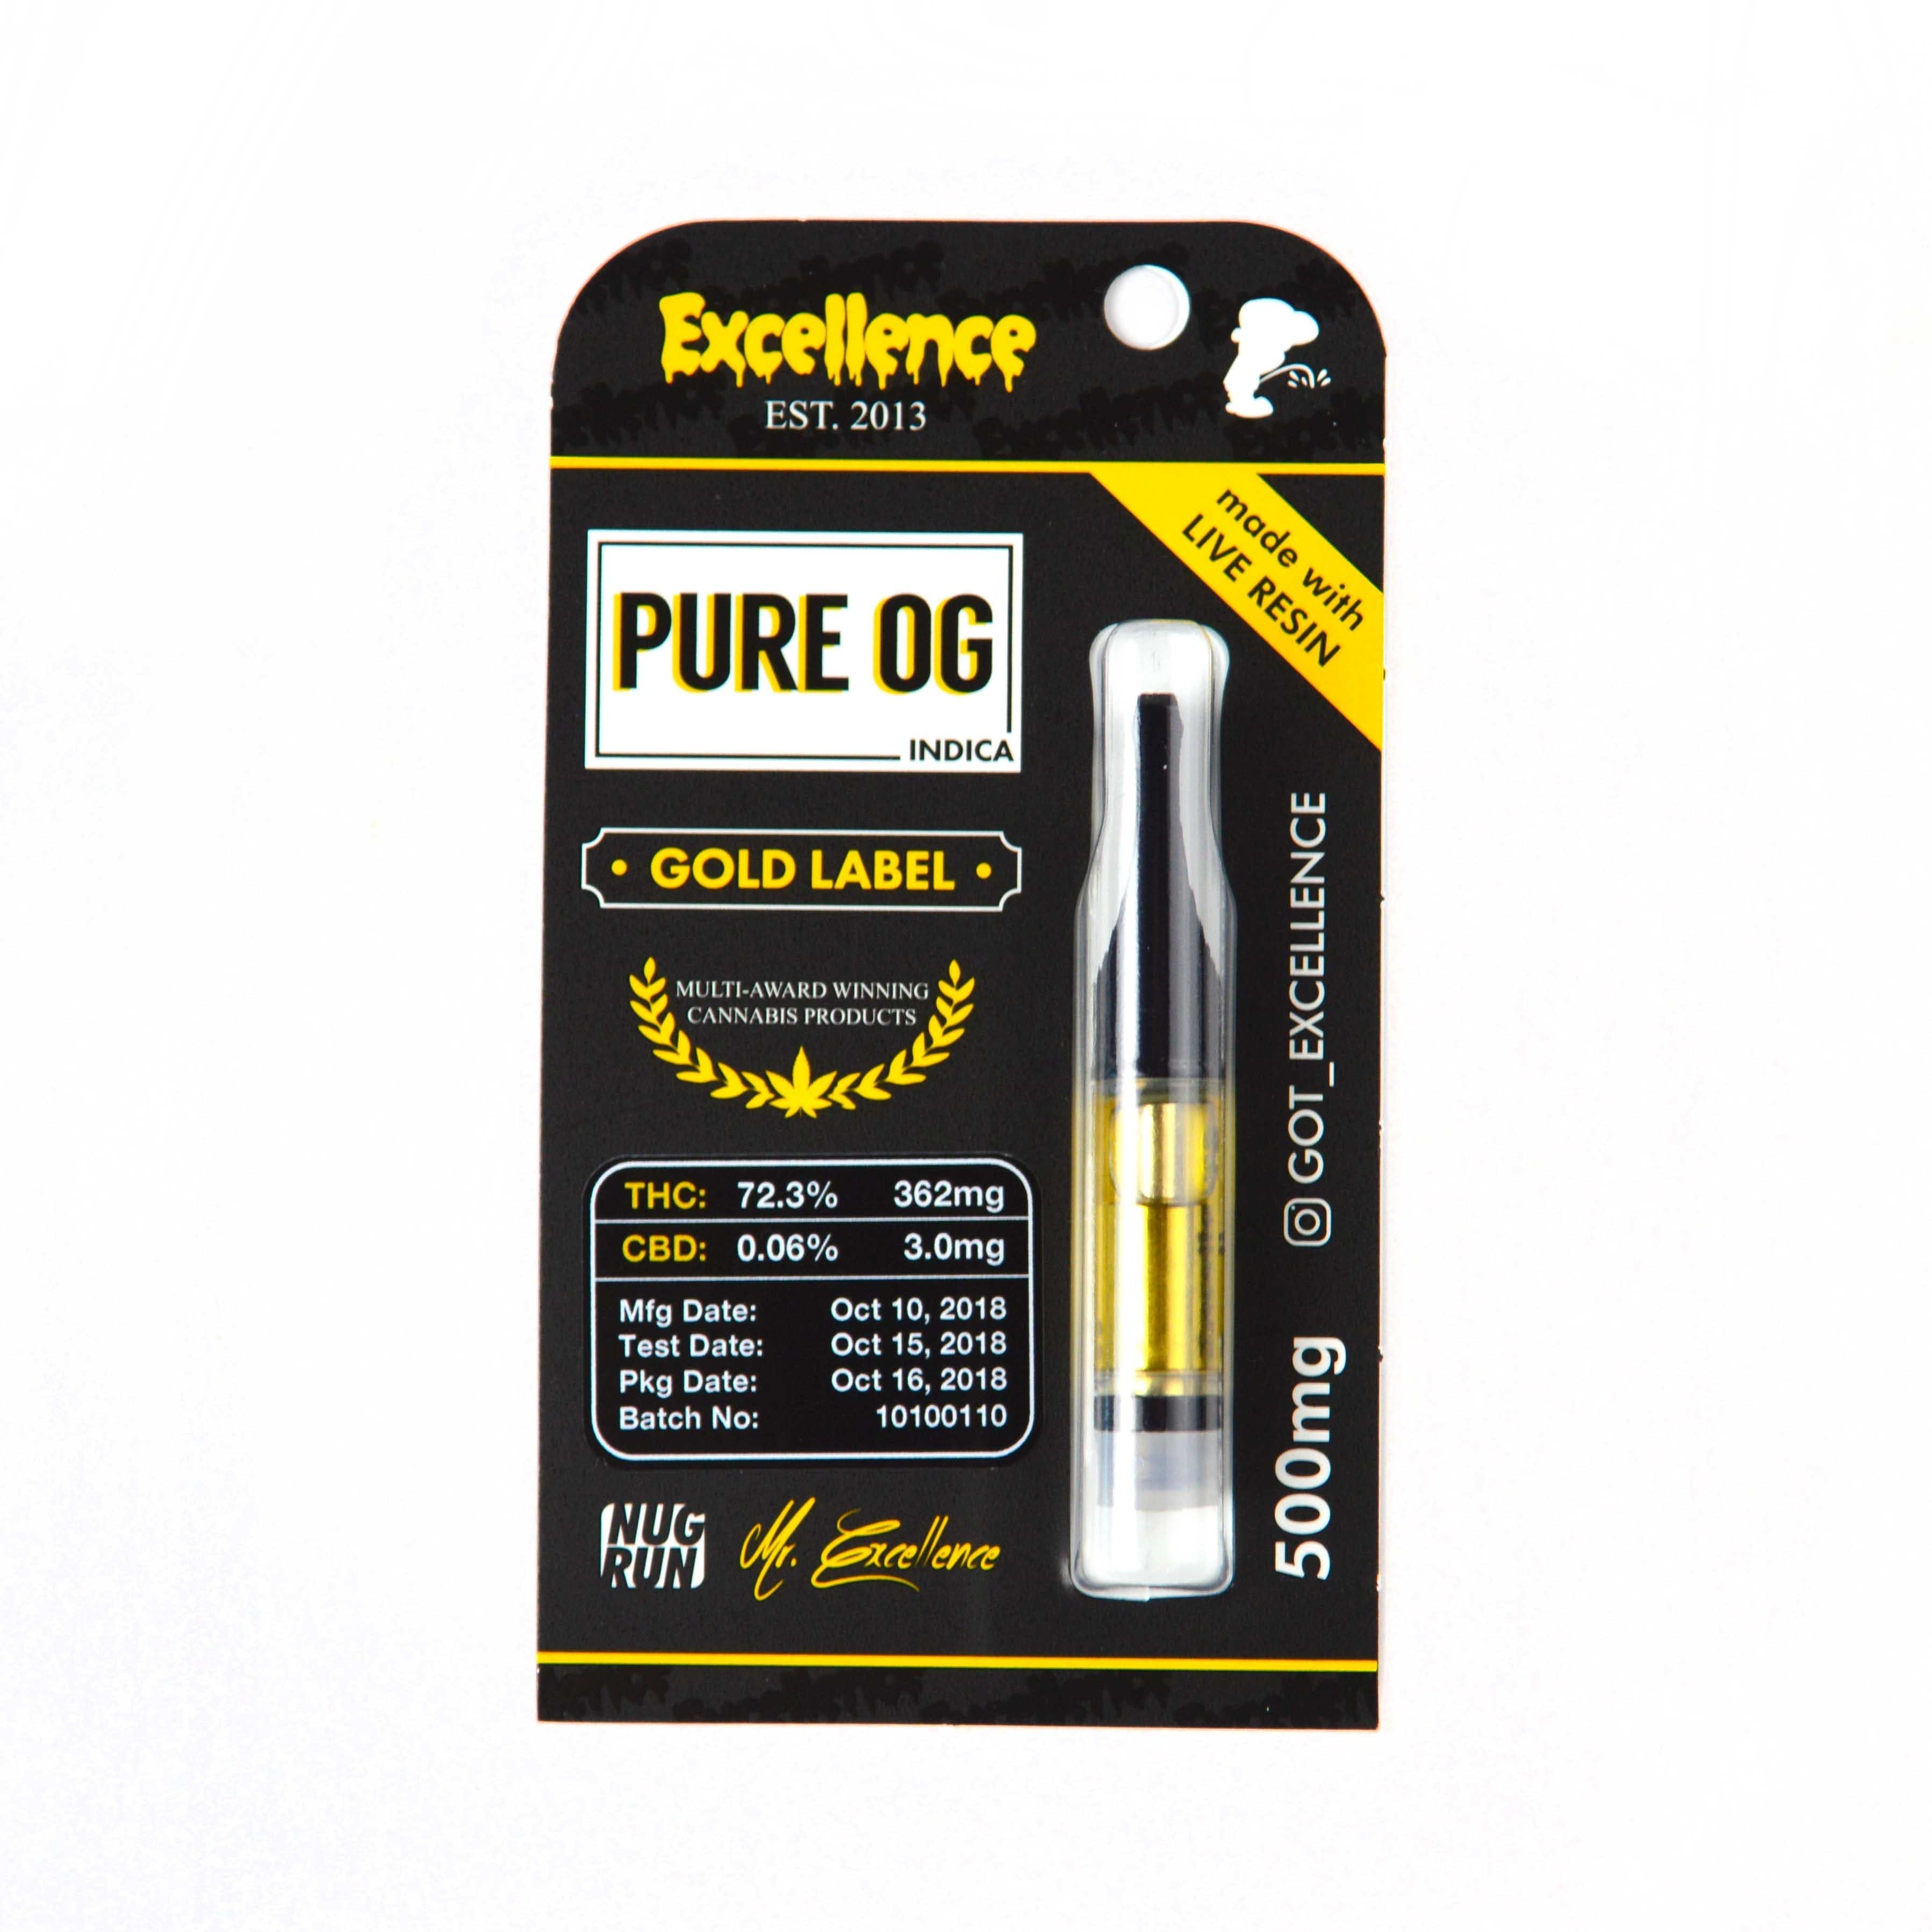 concentrate-excellence-pure-og-gold-label-cartridge